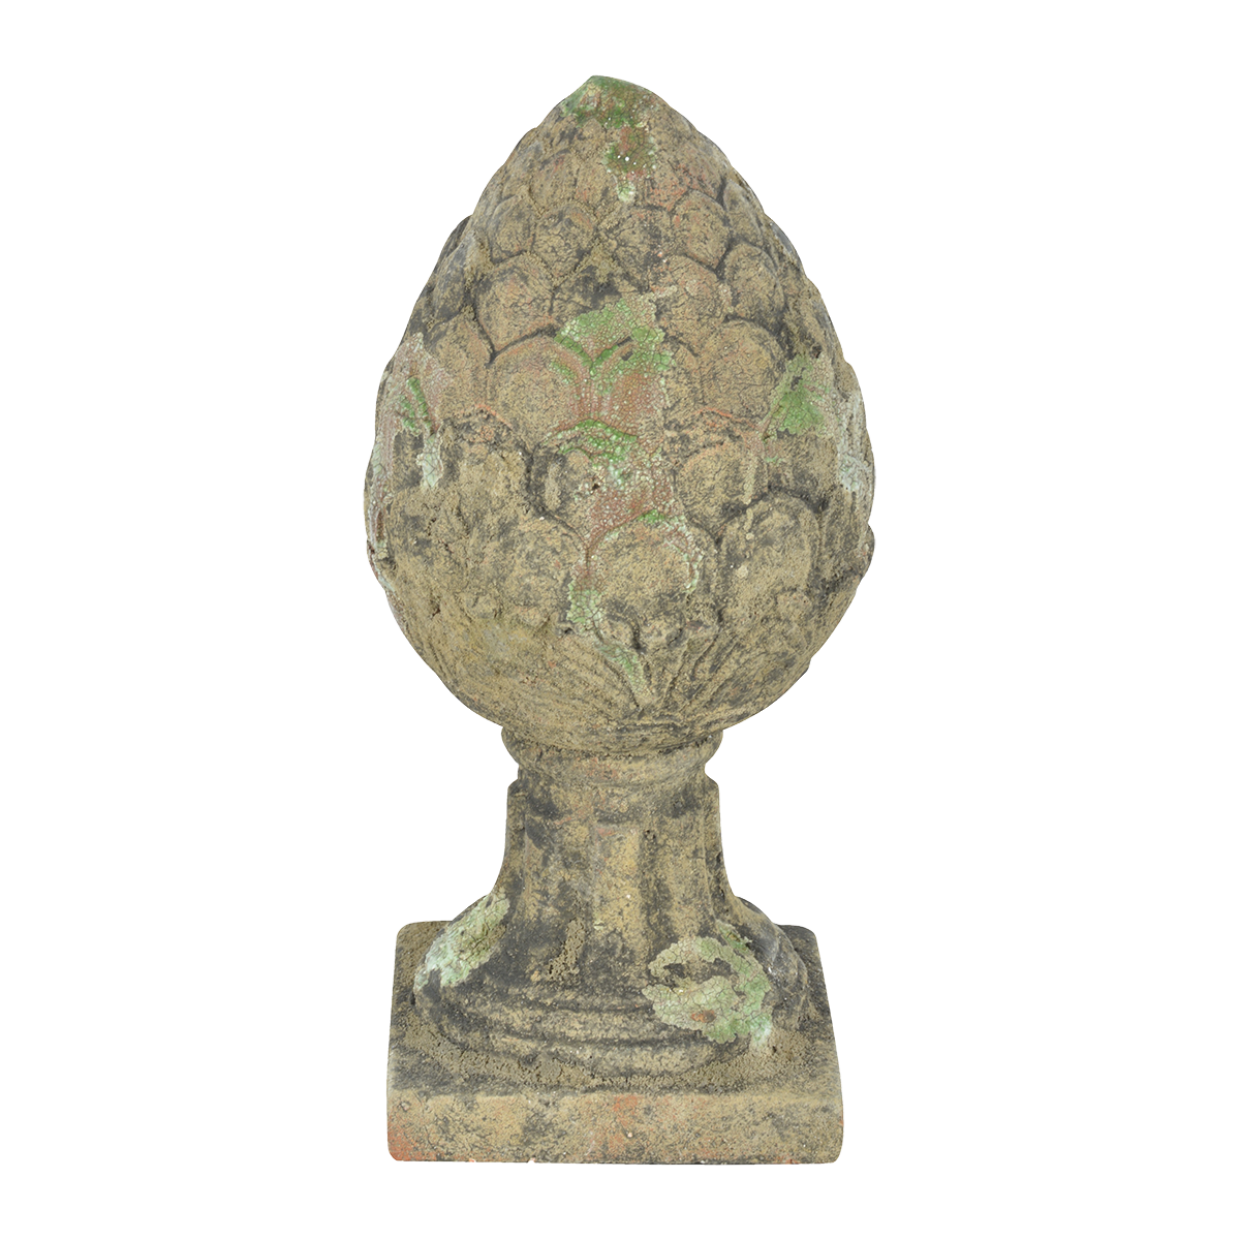 Aged Ceramic Finial Pinecone, Moss Green, Large